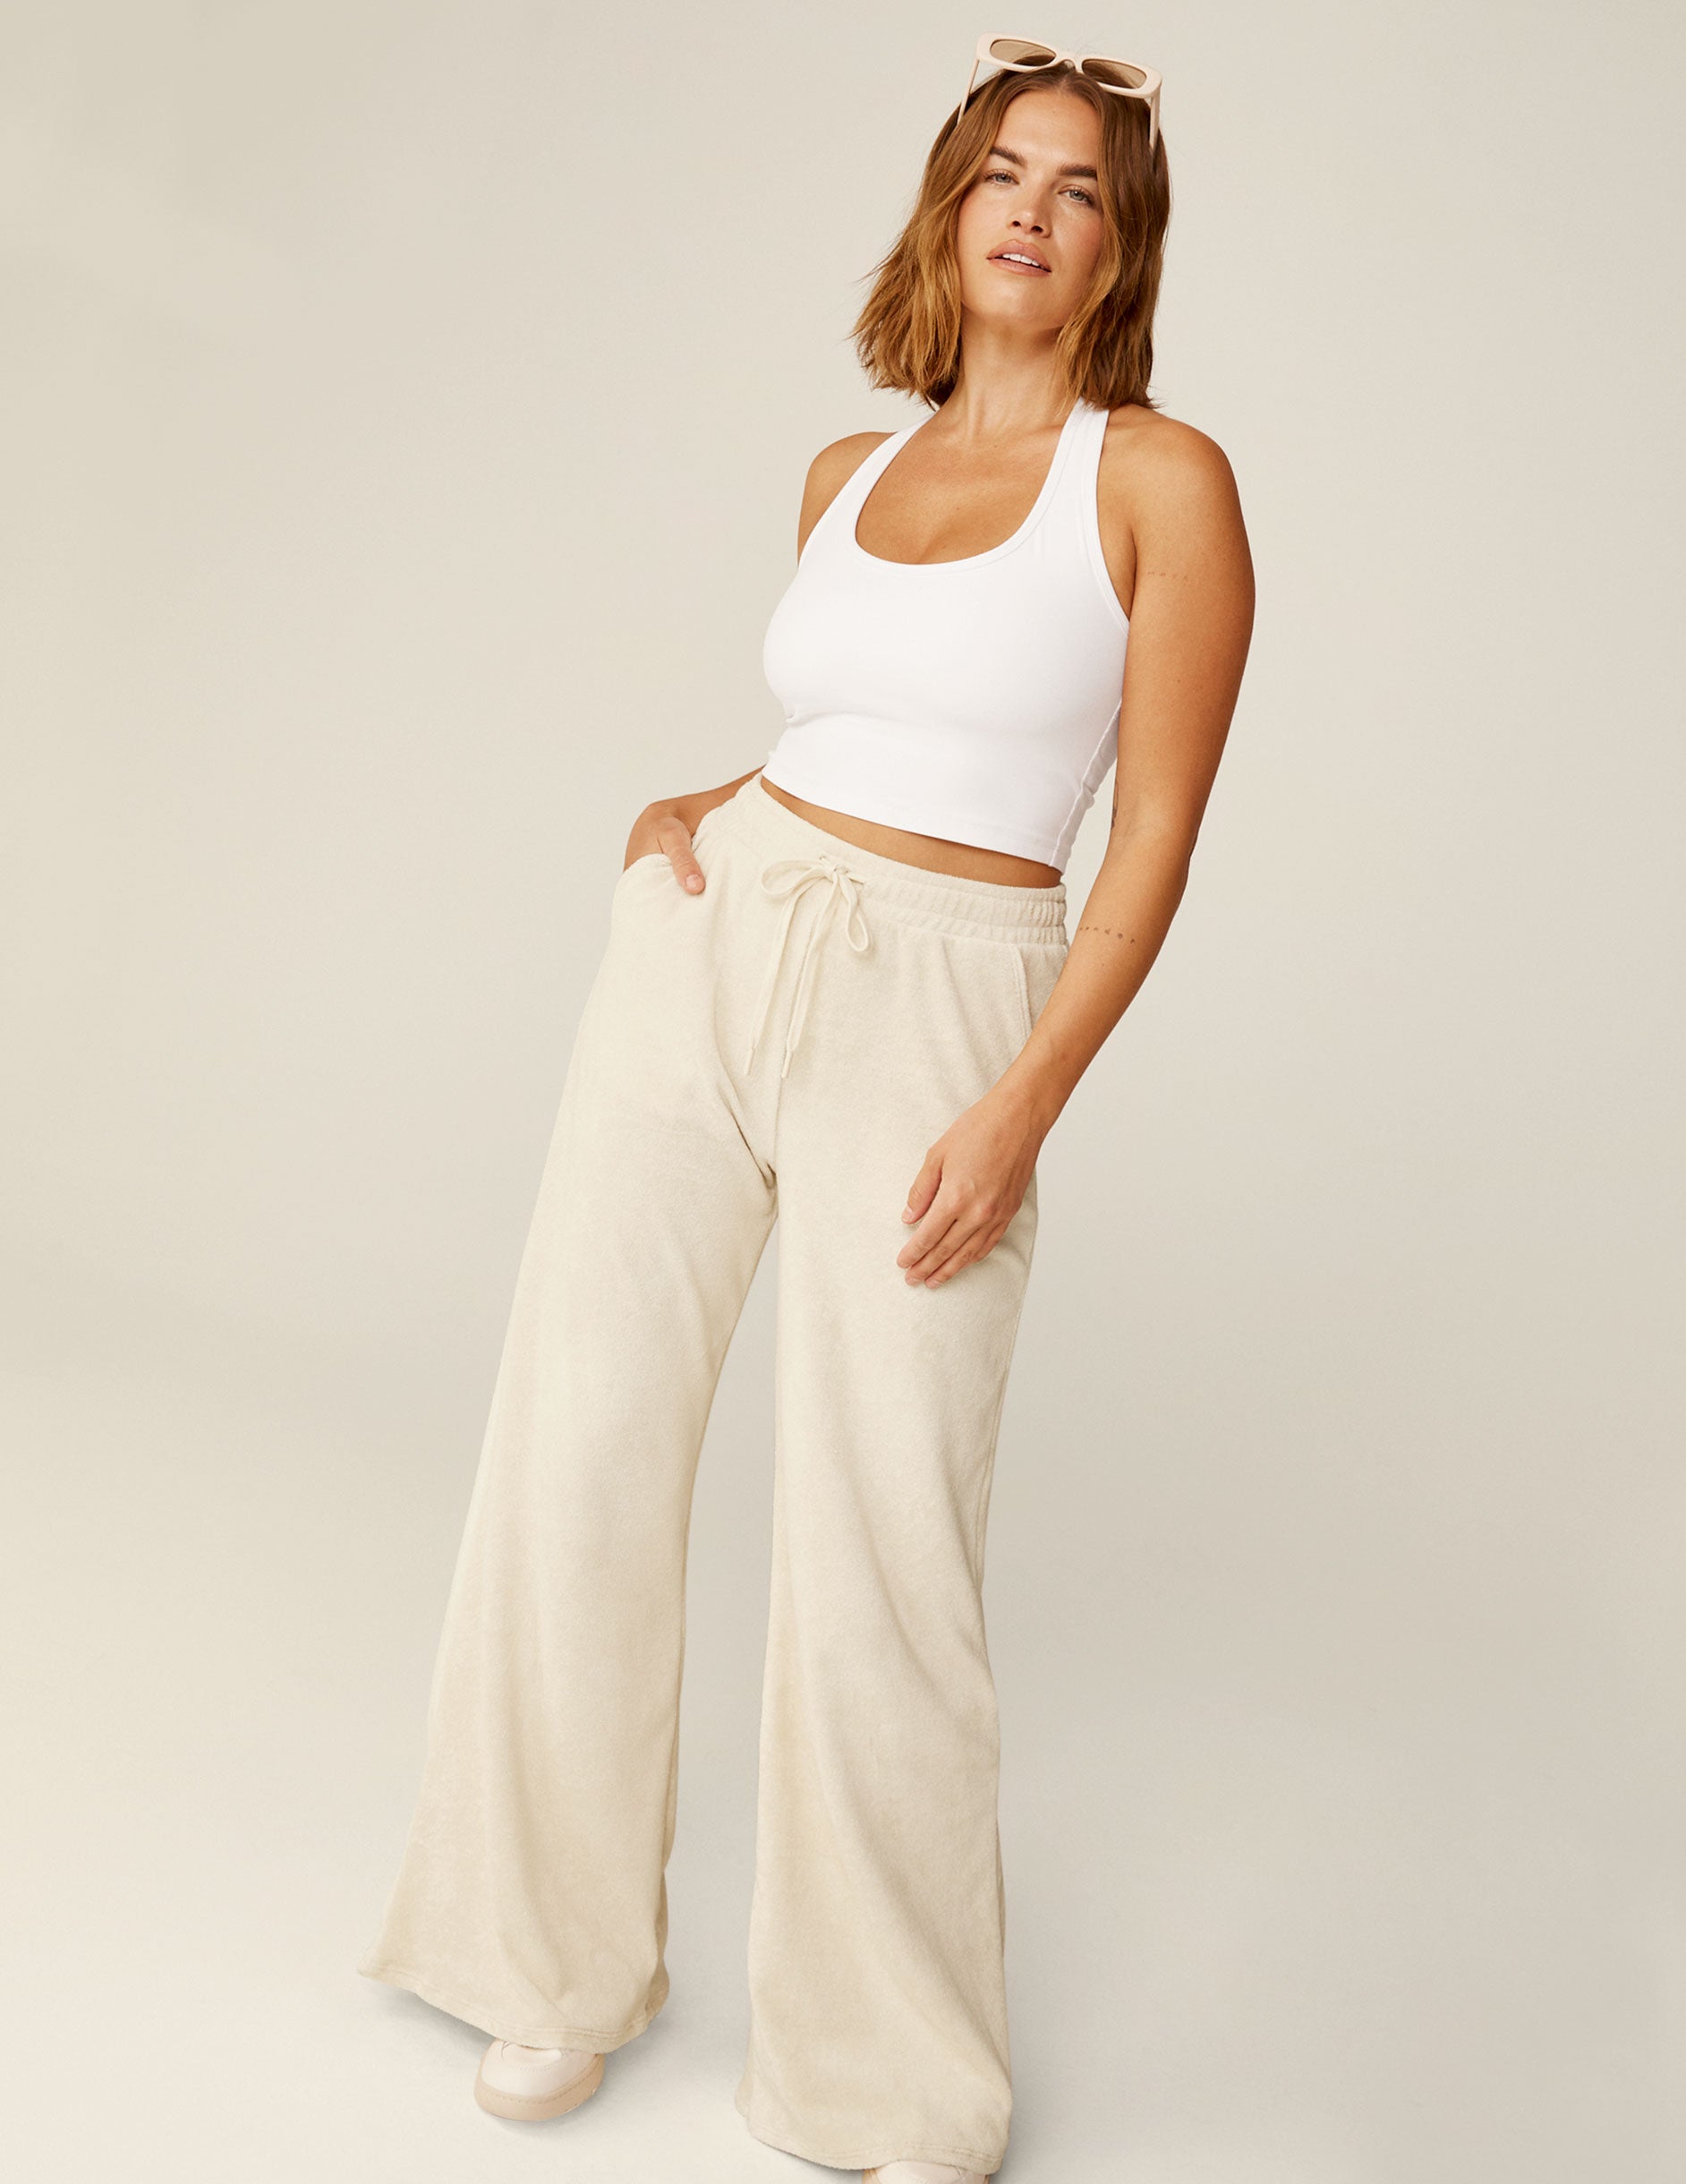 white terry fabric wide leg pants with a drawstring at the waistband.